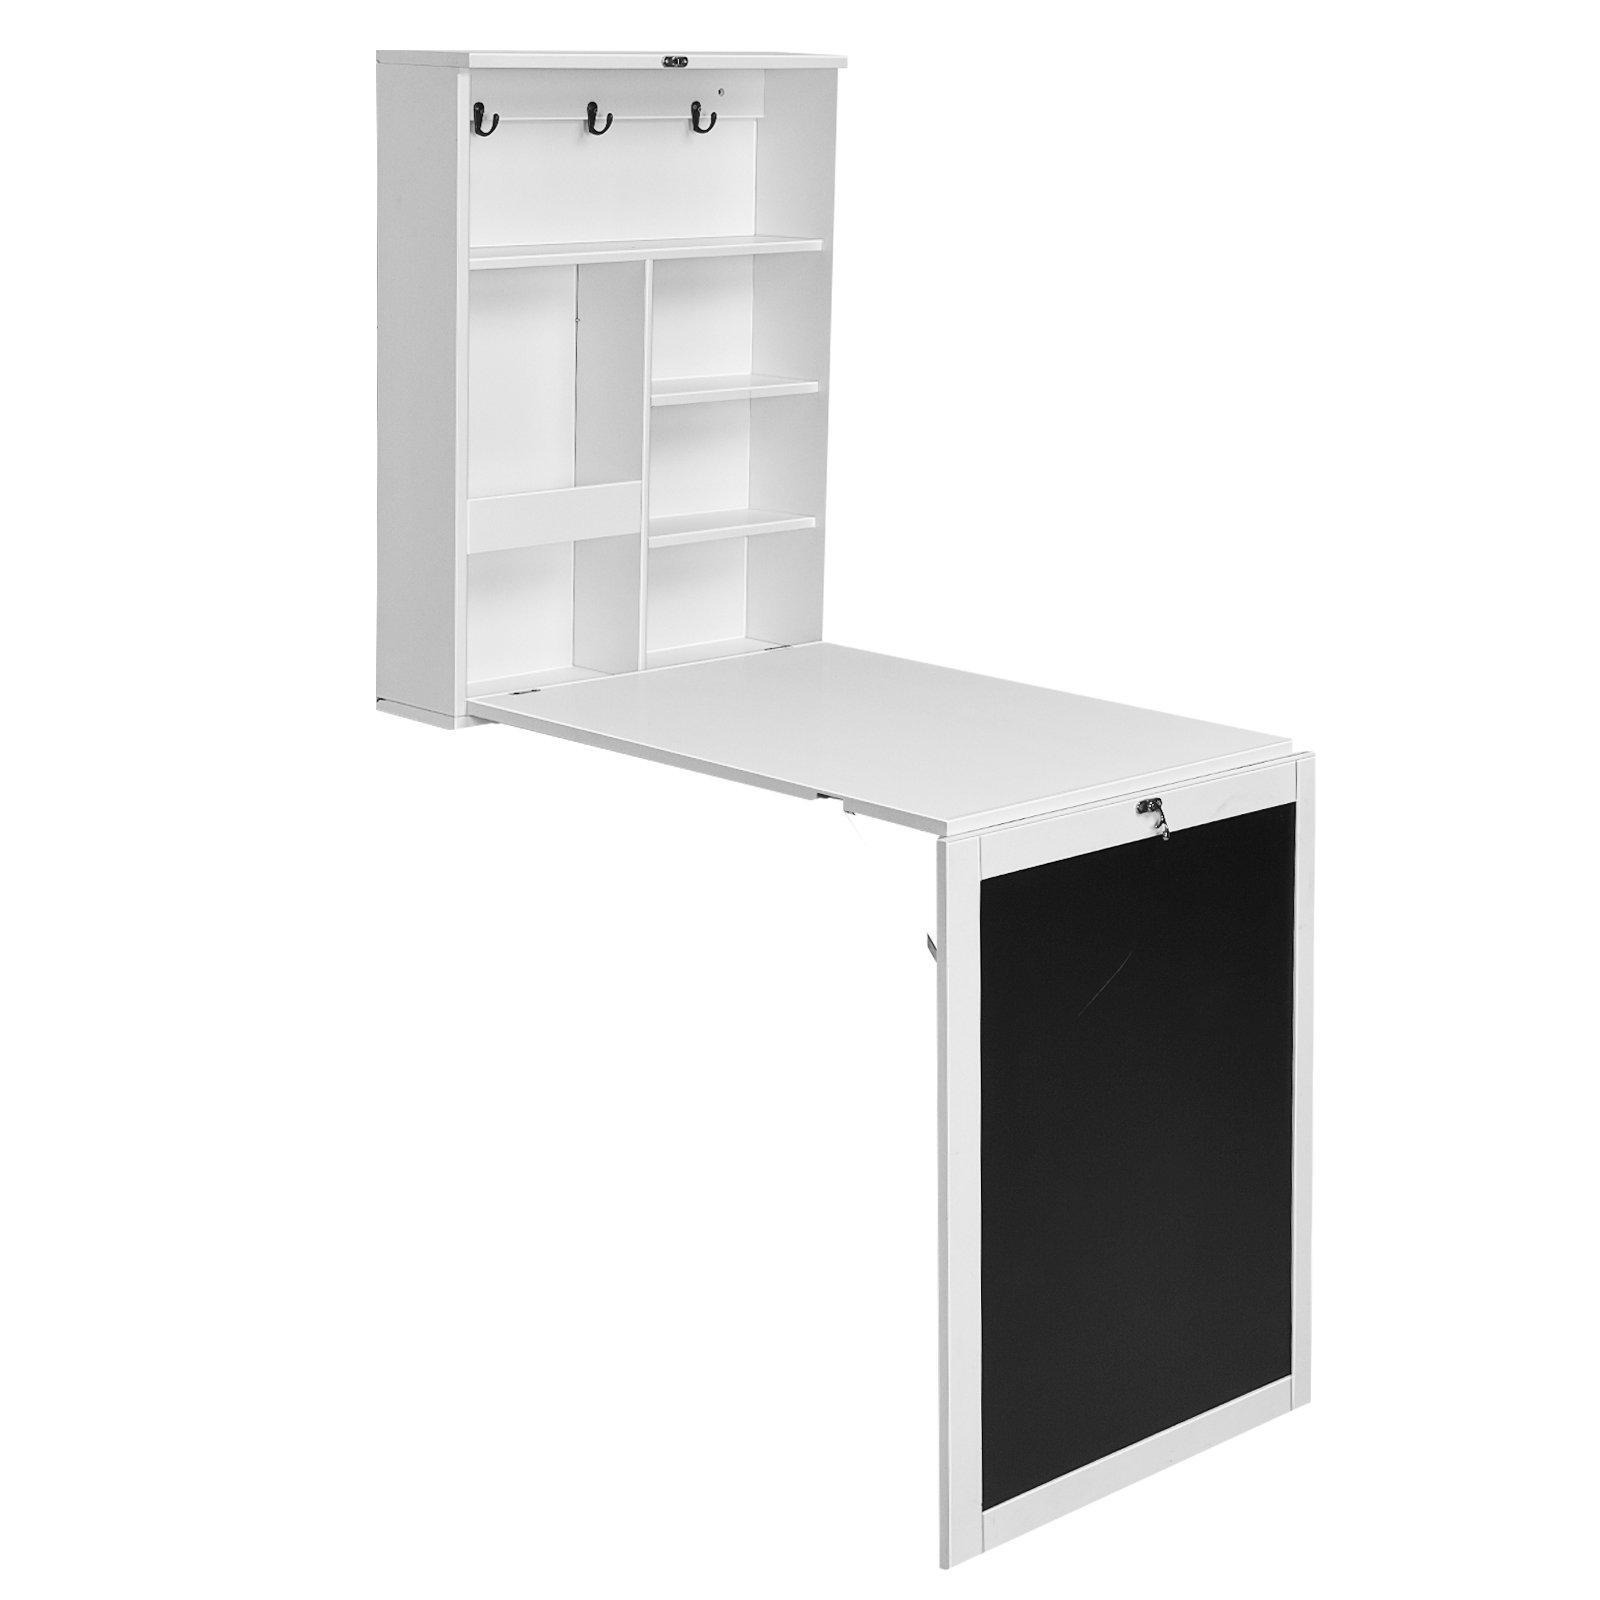 Folding Wall Mounted Drop-Leaf Table Space Saving Floating Computer Desk - image 1